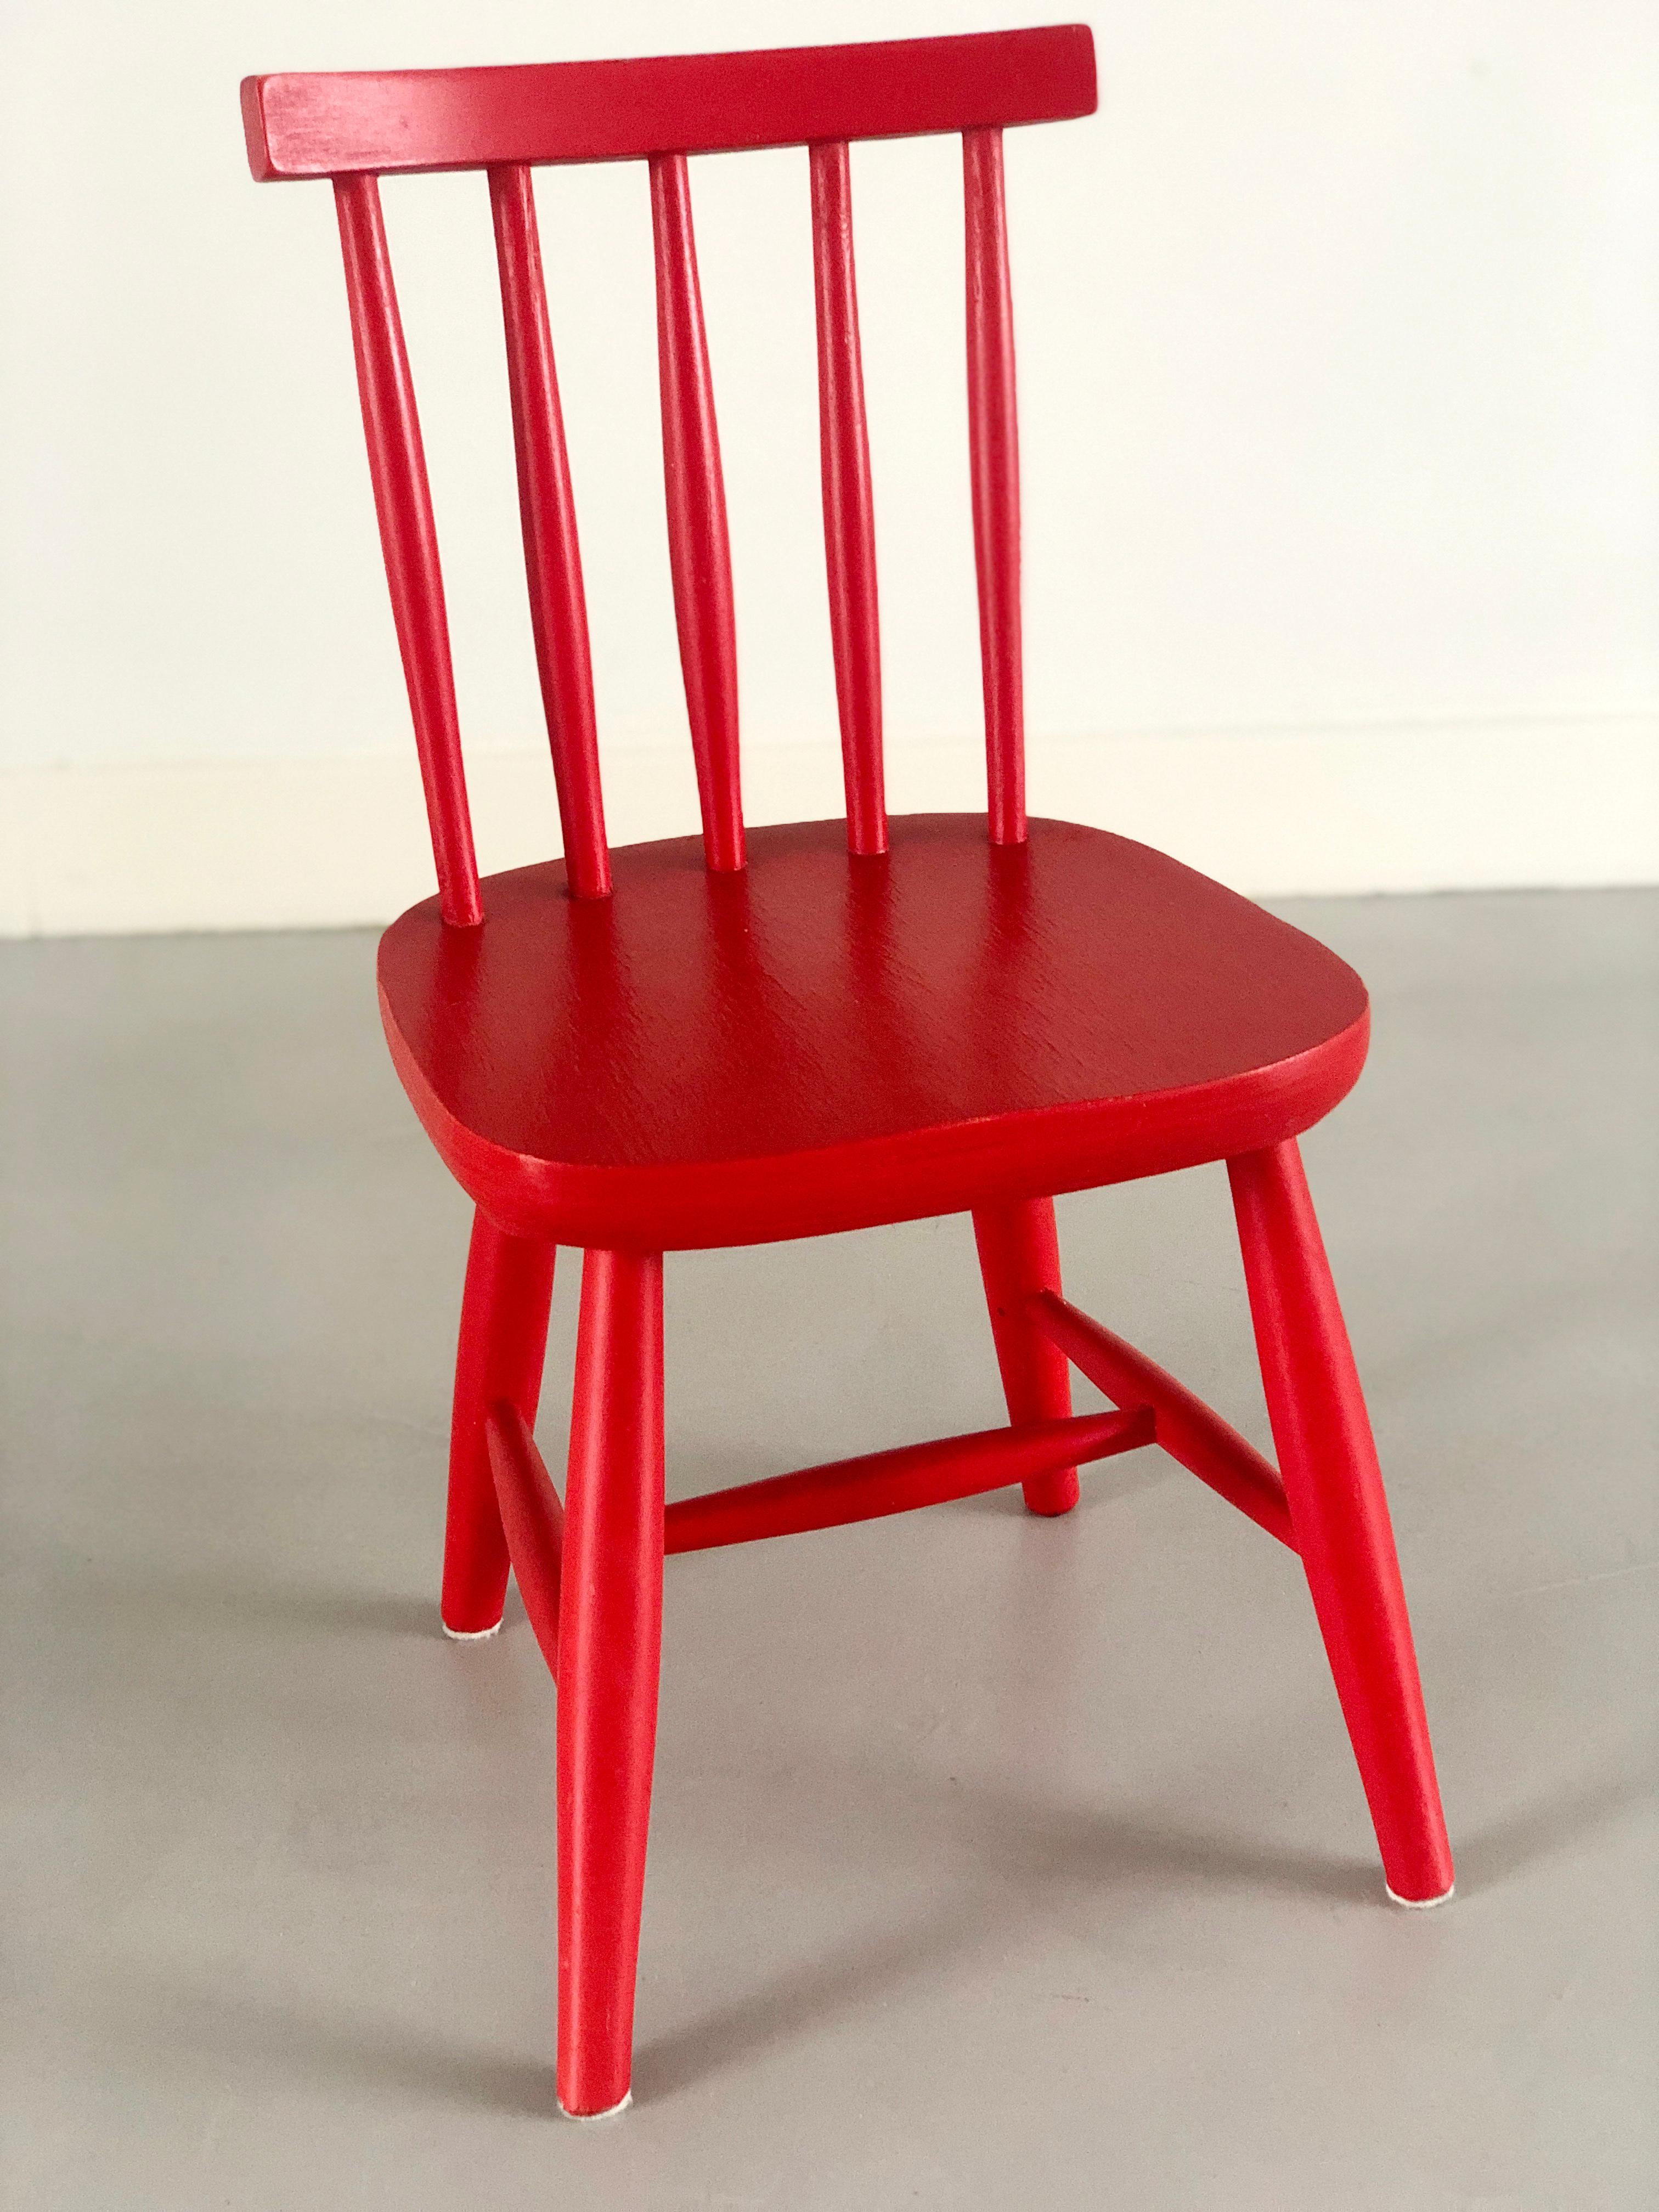 Scandinavian Poul Volther style red wooden child chair 1960's.
Cute vintage red chair from the sixties. 
Possibly by the Danish designer Poul Volther. 
Completely original with beautiful crackle in the paint.